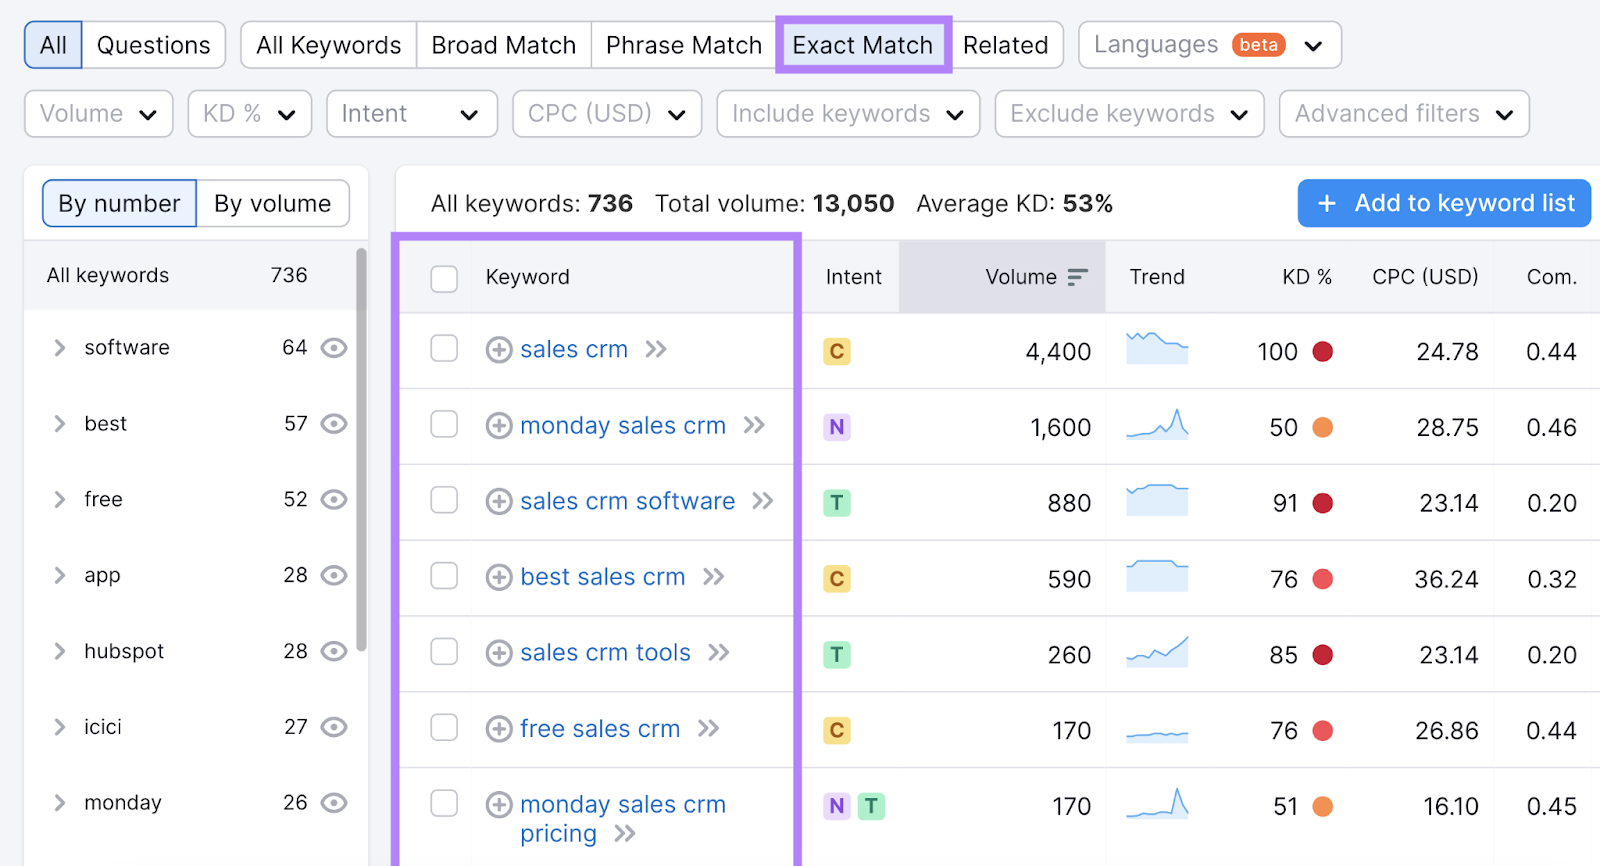 "Exact Match" results for "sales crm" keyword